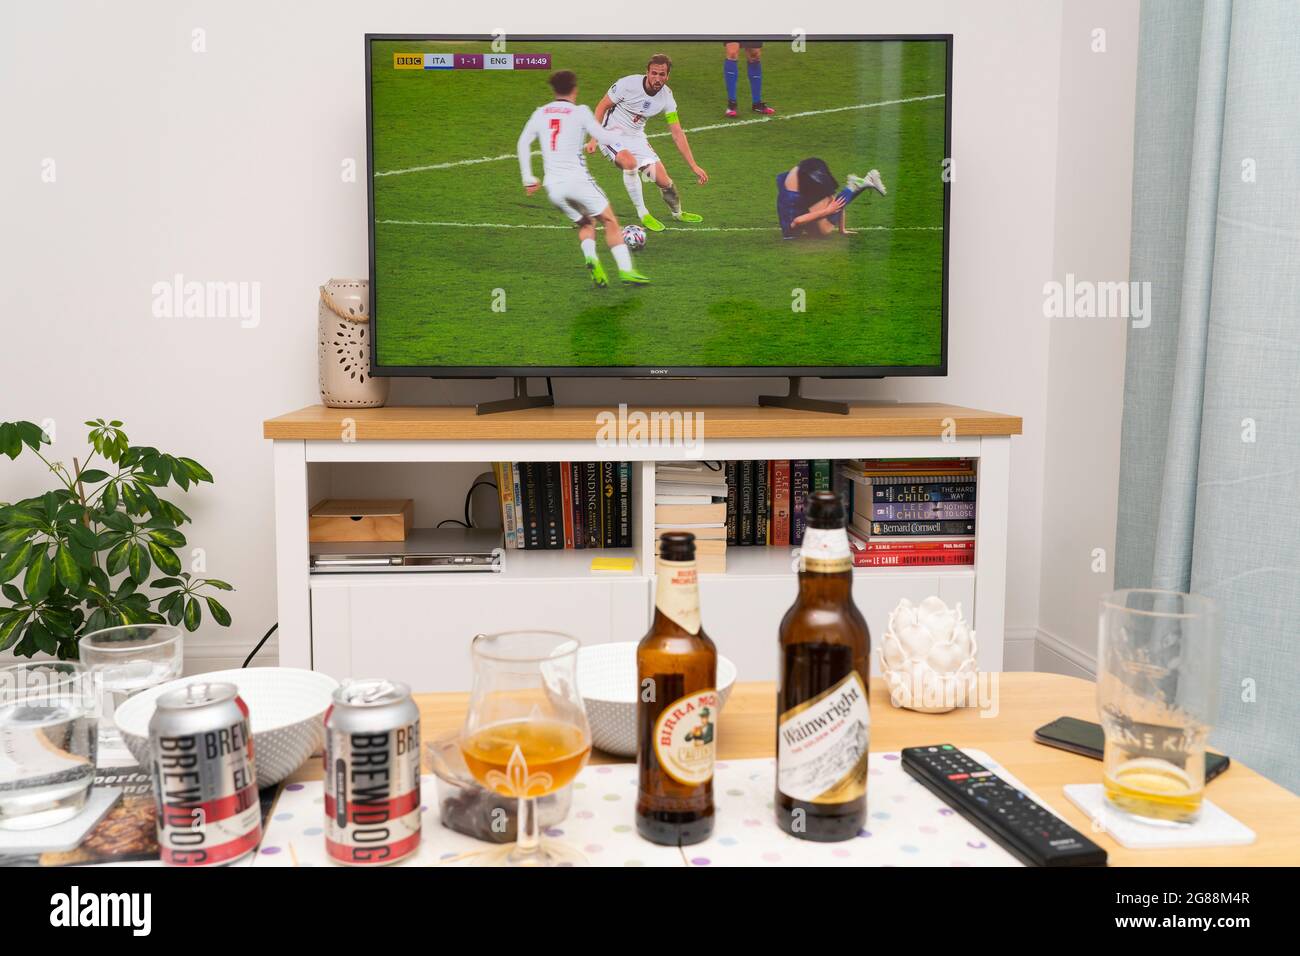 A widescreen tv showing Harry Kane on the ball during the UEFA Euro 2020 football competition final with England vs Italy, with beers on a table. UK Stock Photo